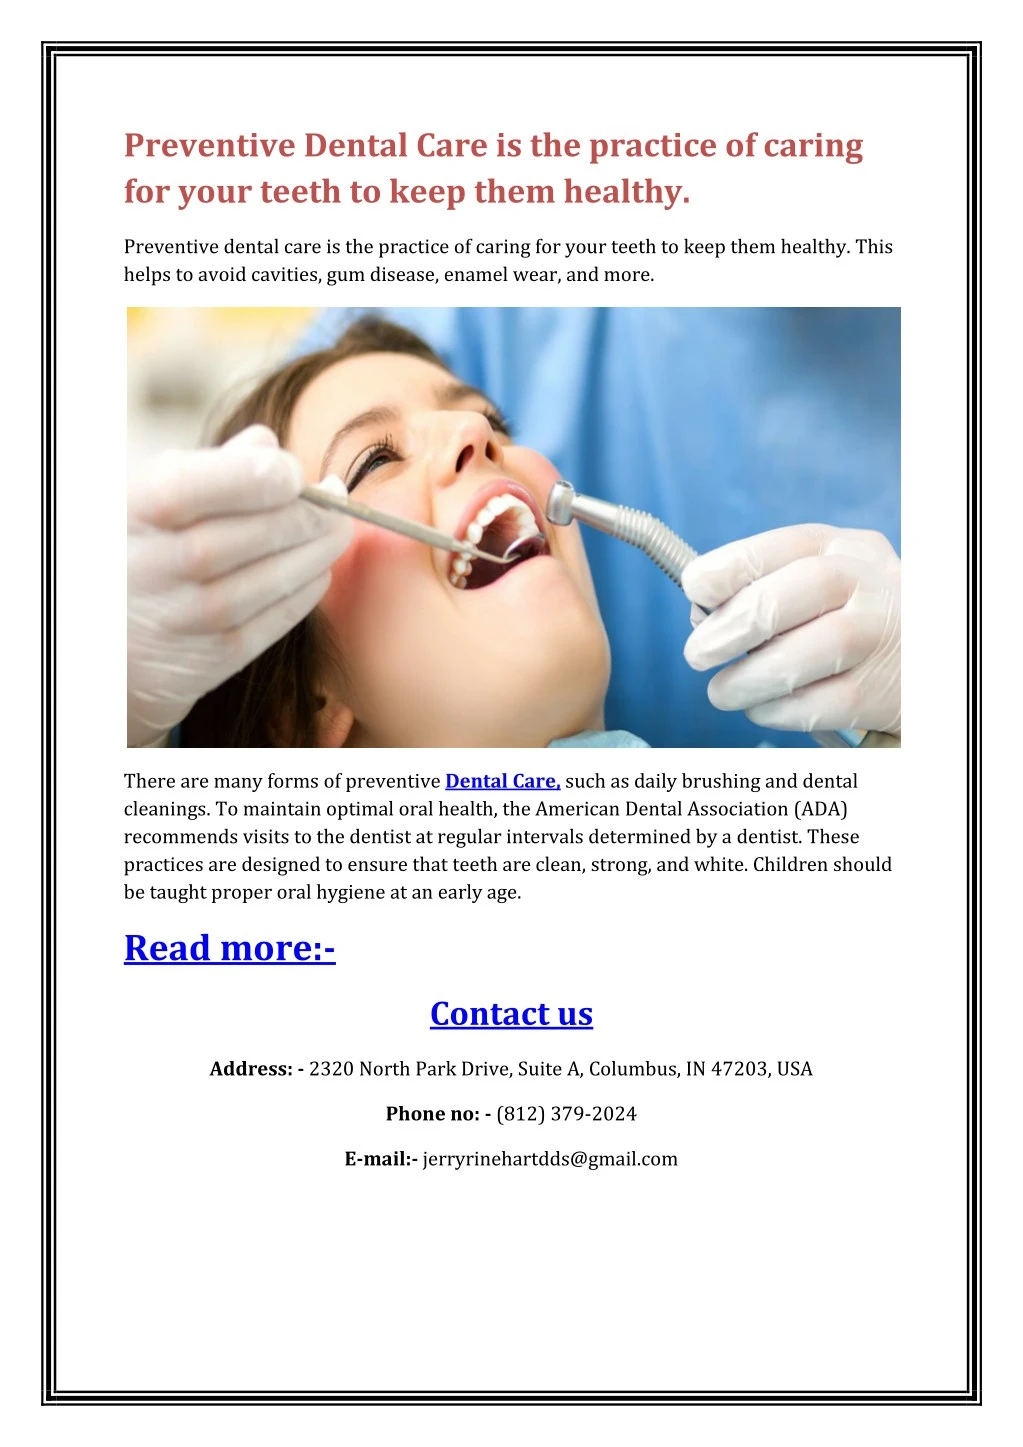 preventive dental care is the practice of caring